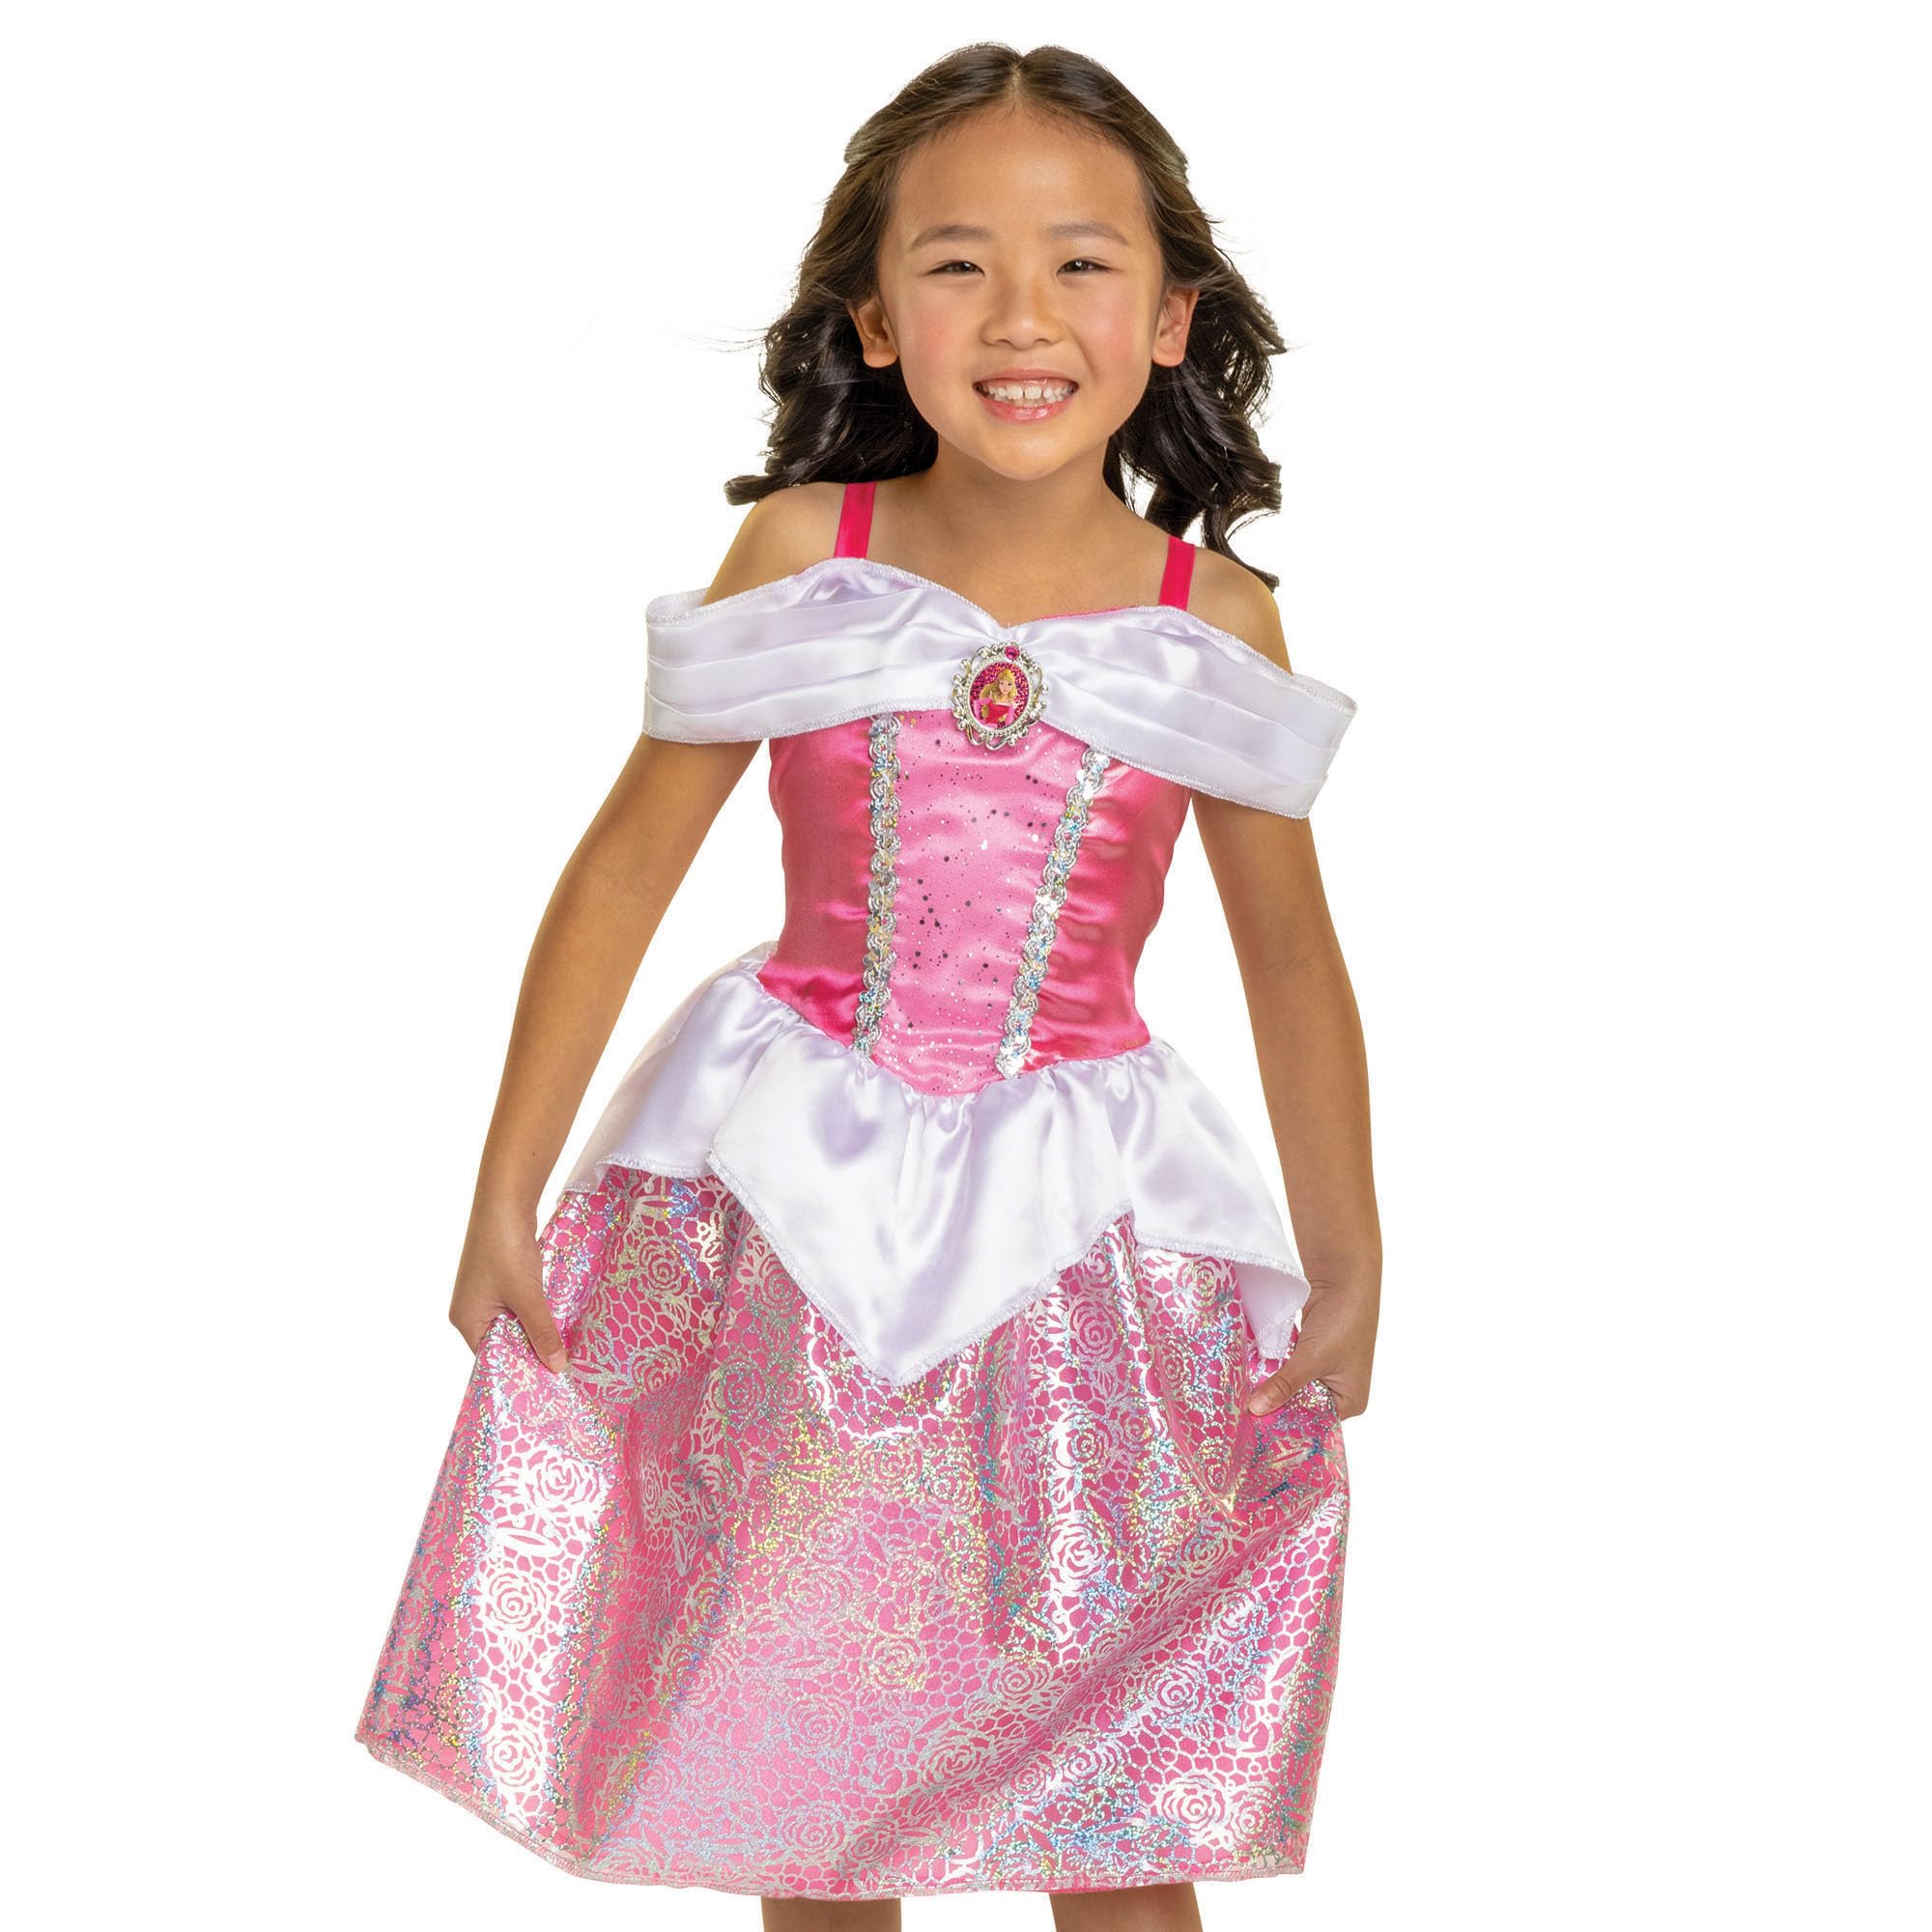 Disney Princess Aurora Dress Costume for Girls, Perfect for Party, Halloween Or Pretend Play Dress Up